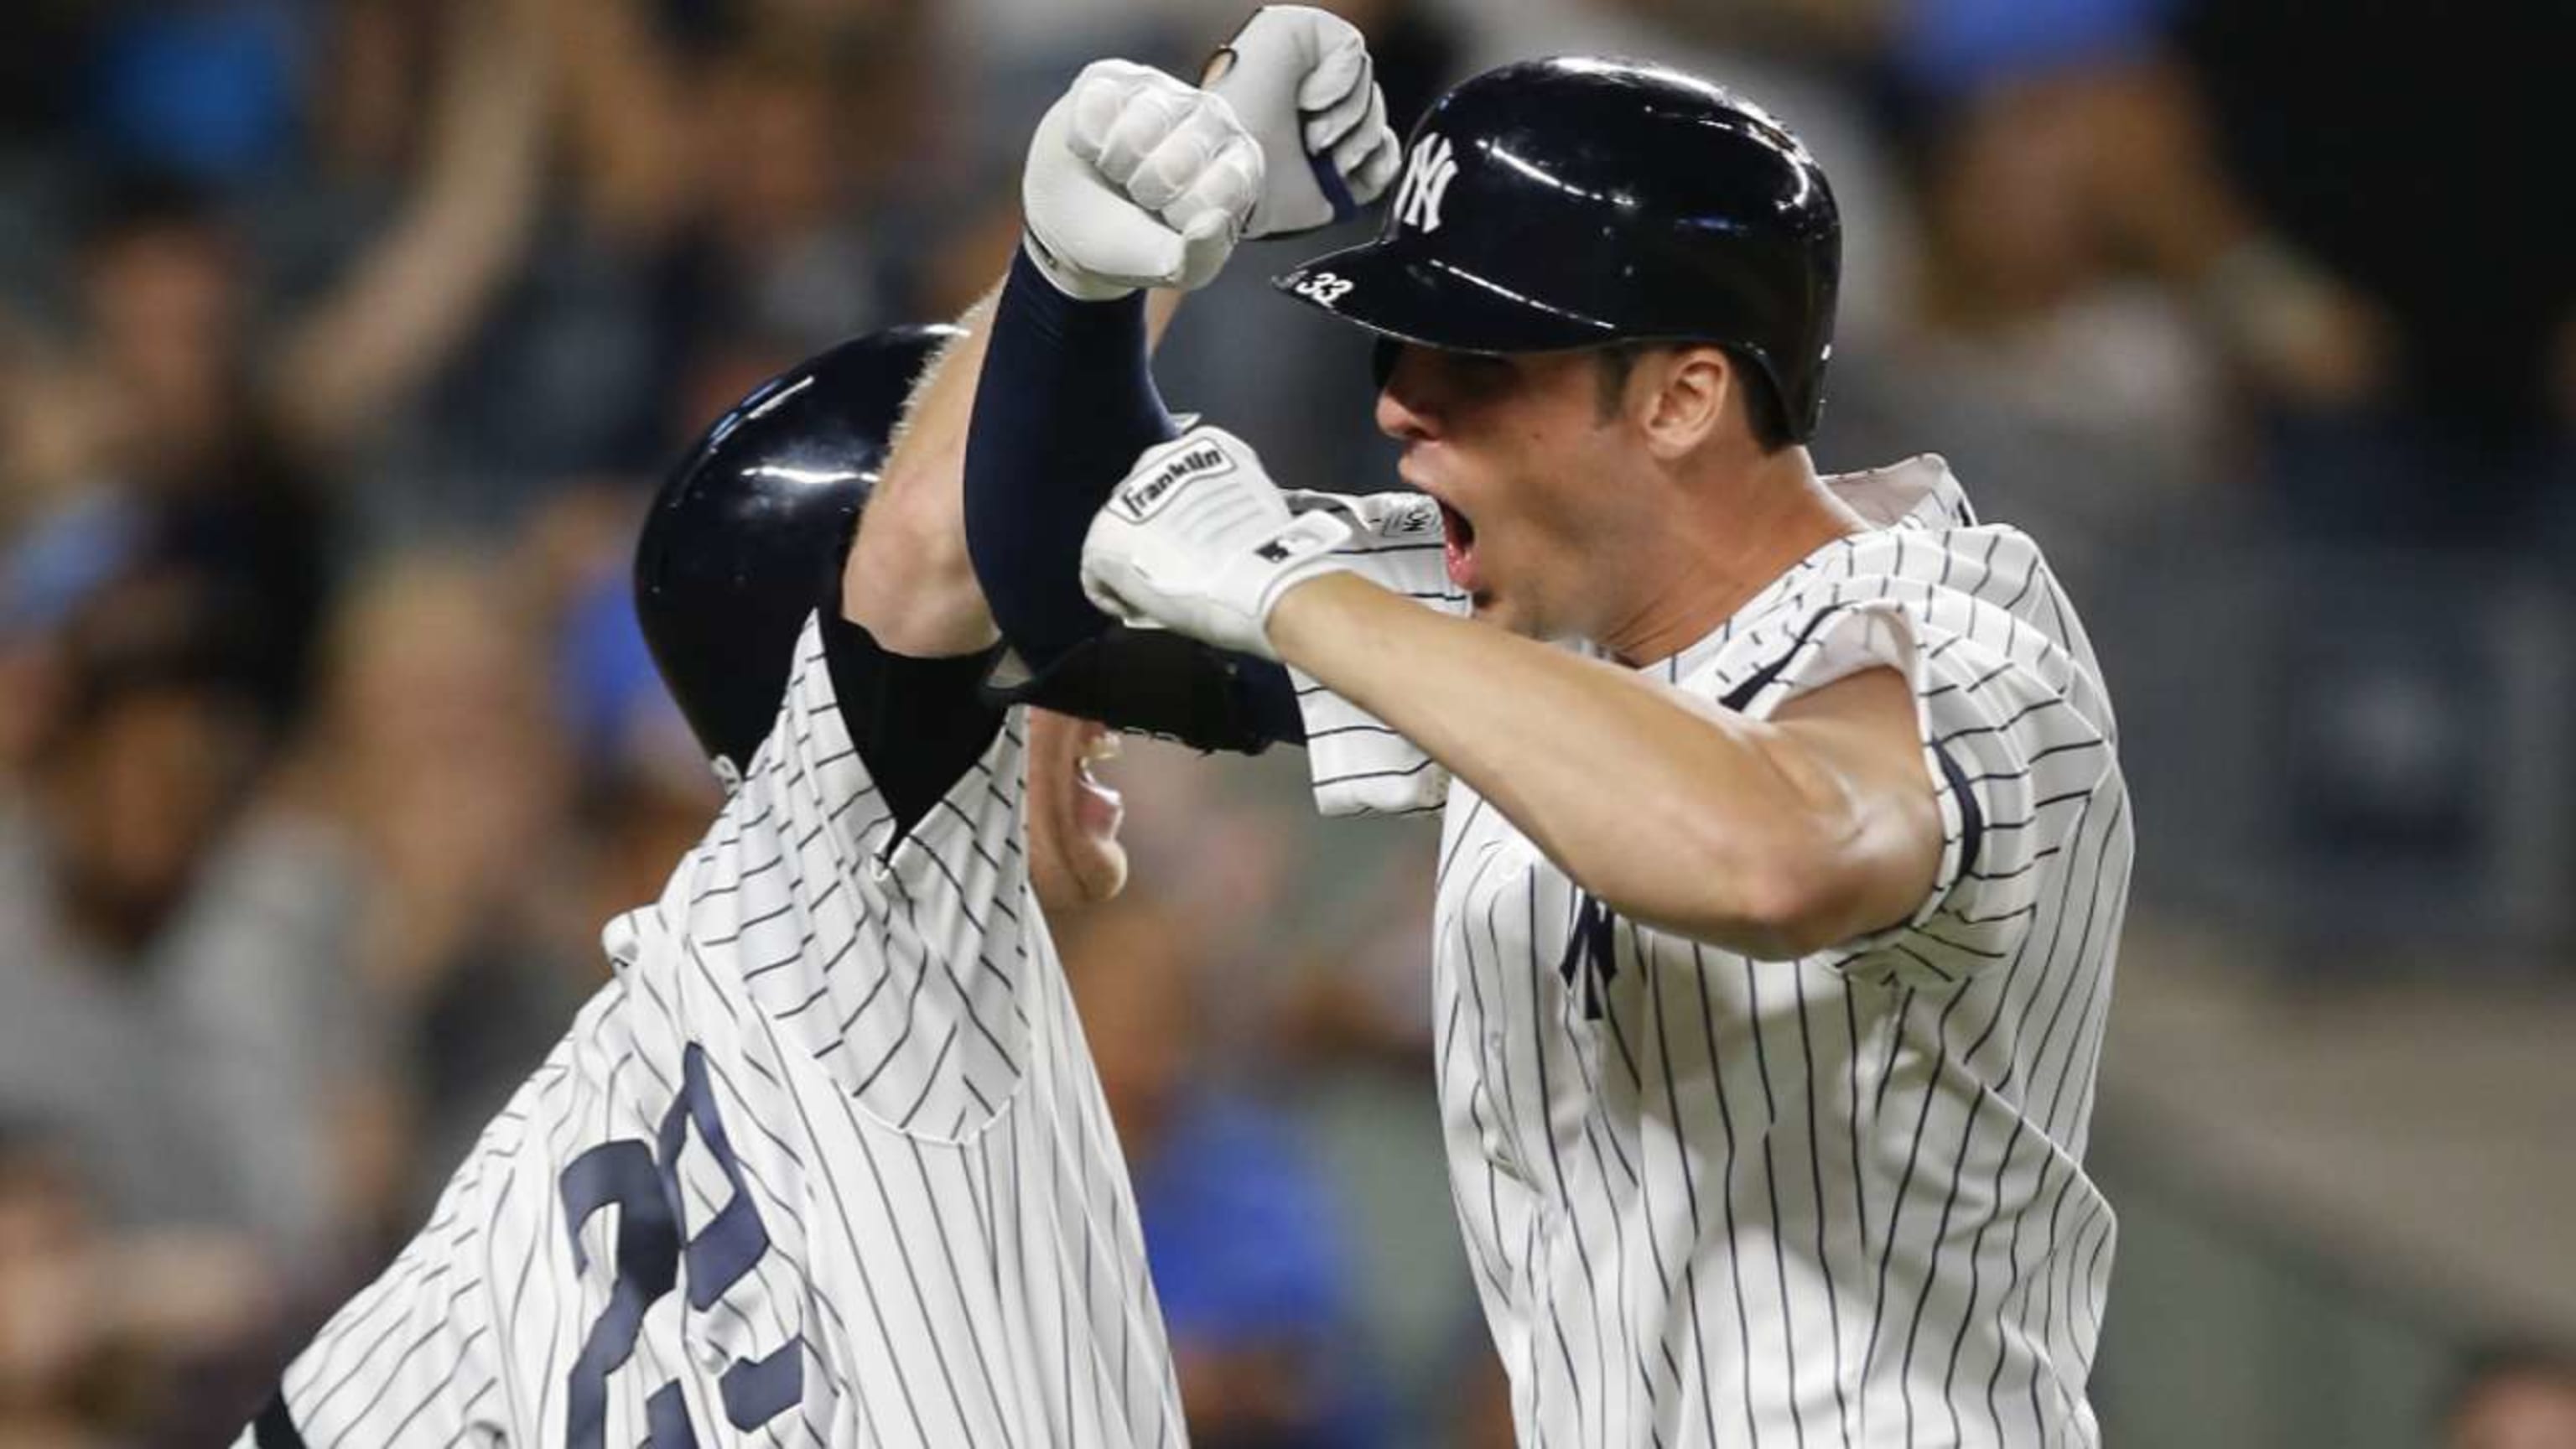 New York Yankees 1B Greg Bird has improved one critical part of